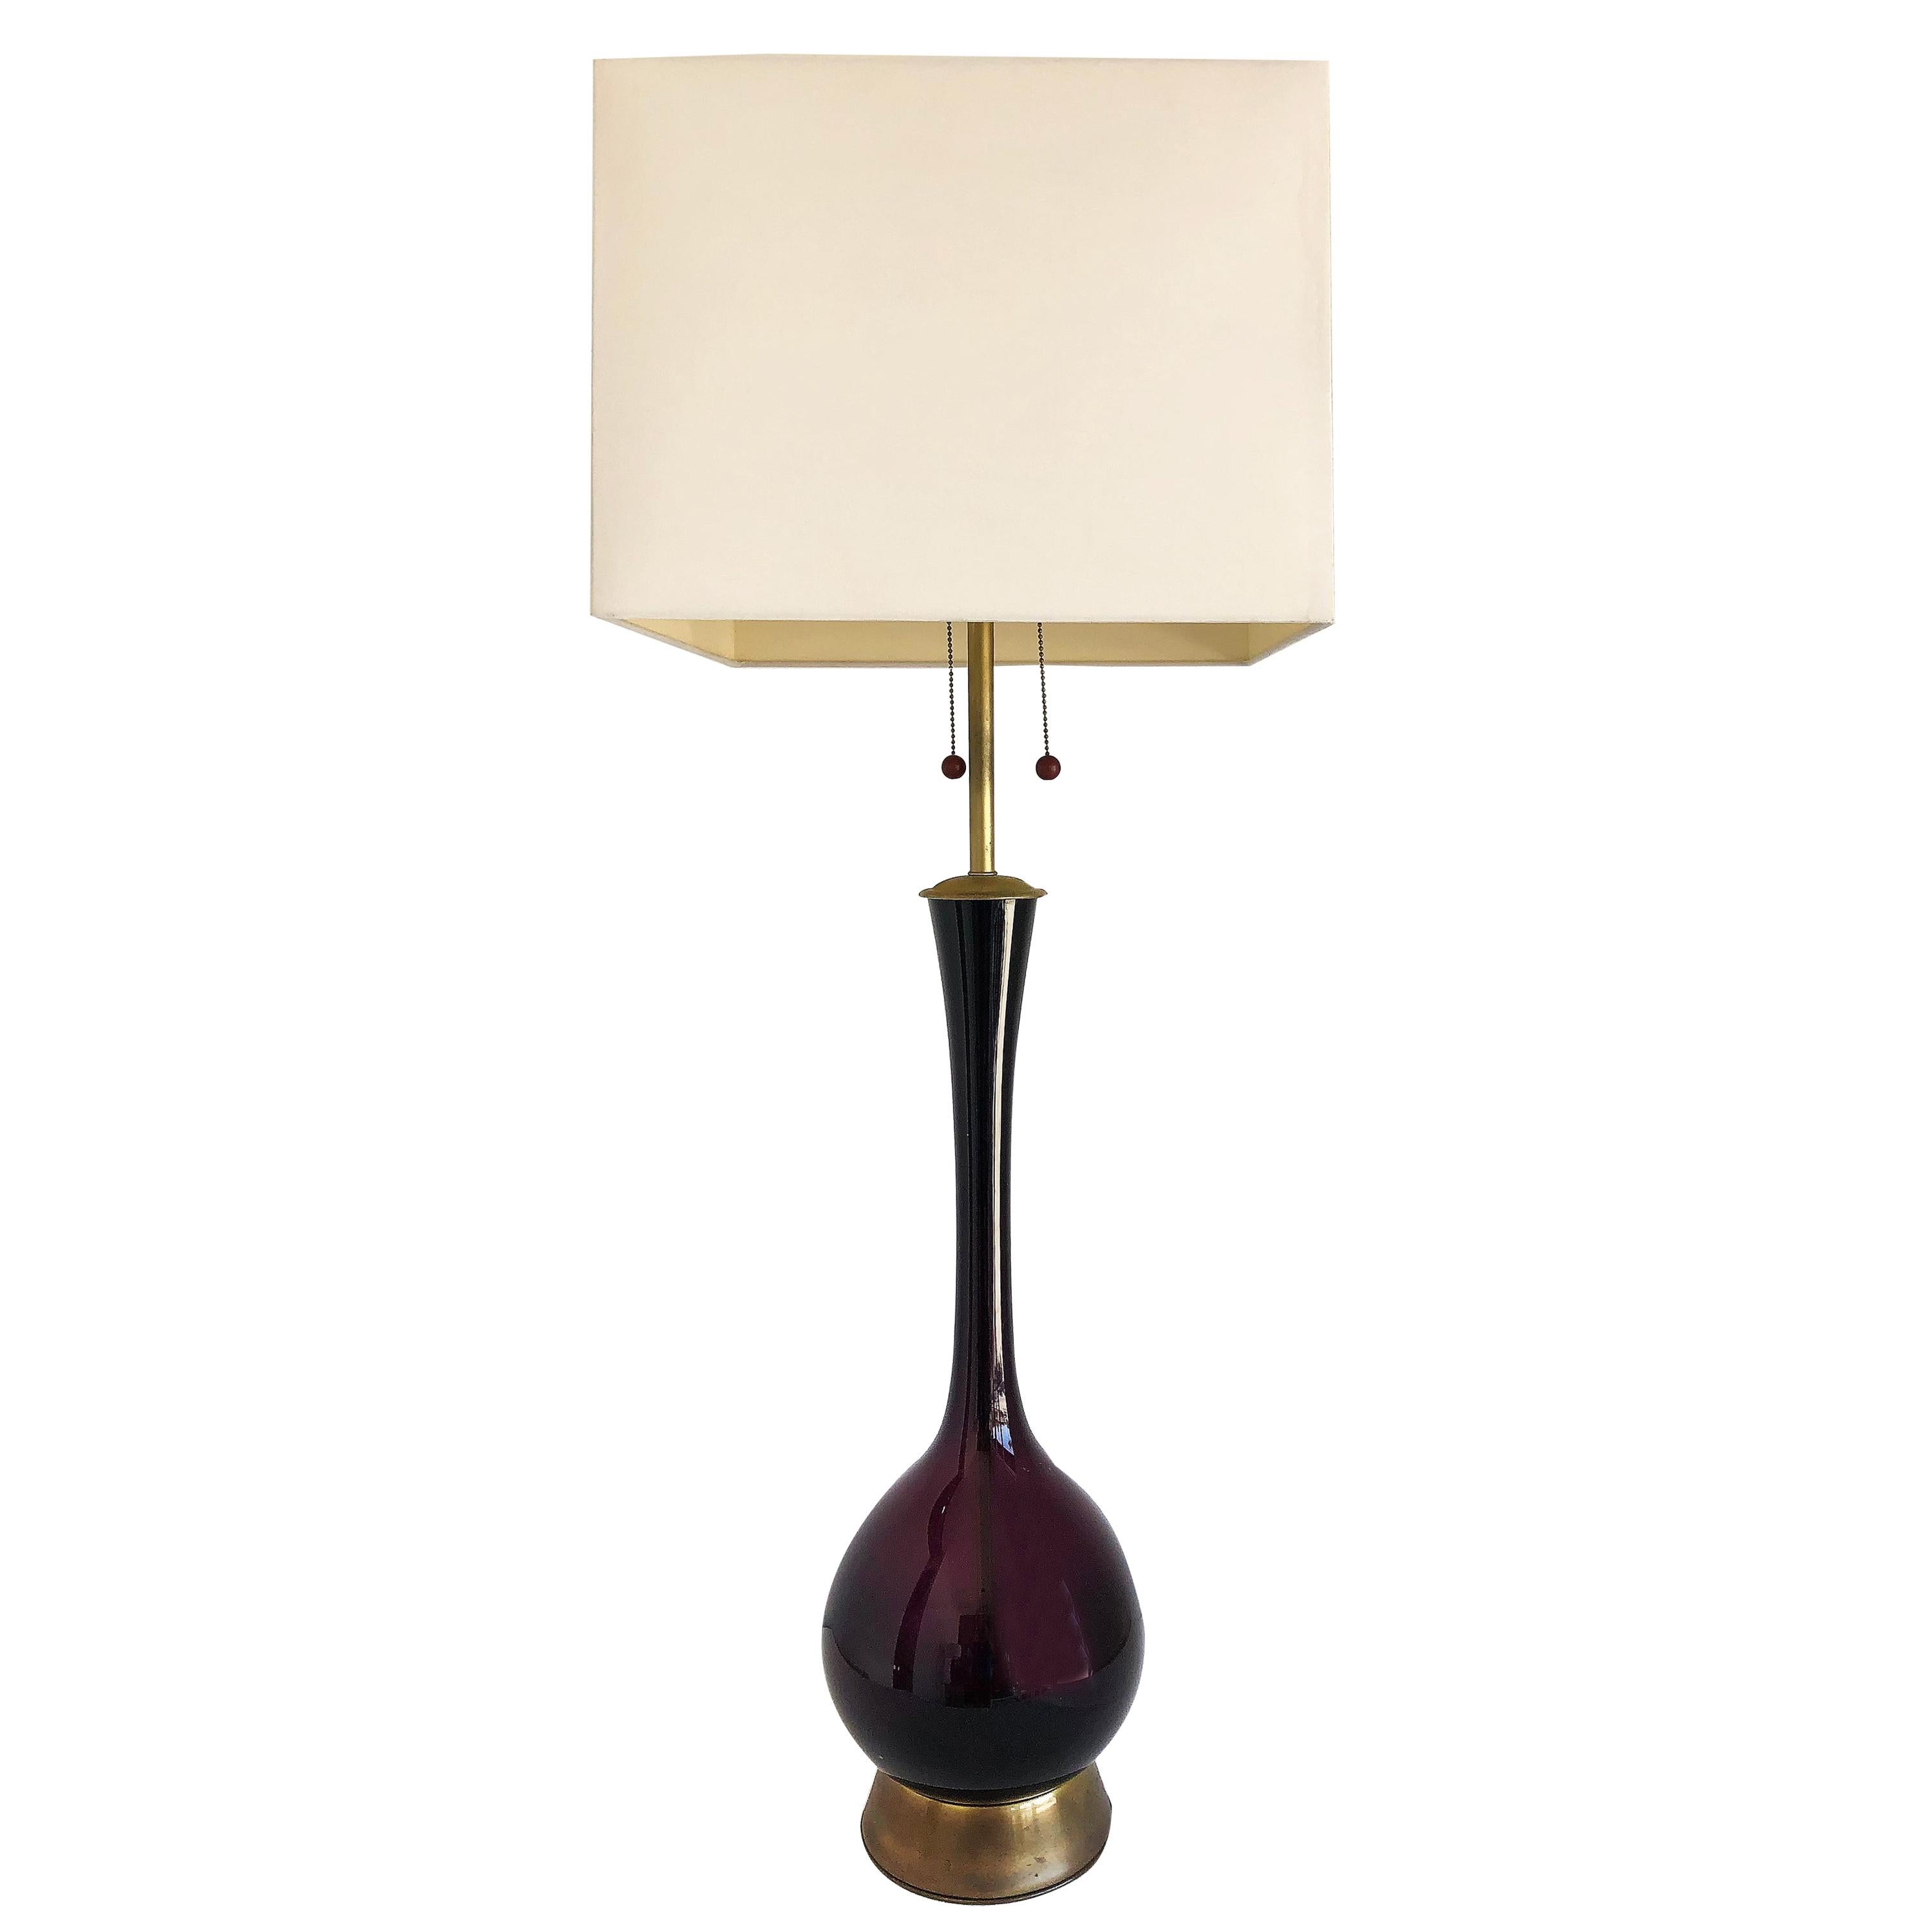 Monumental 1950s Midcentury Murano Table Lamp For Sale